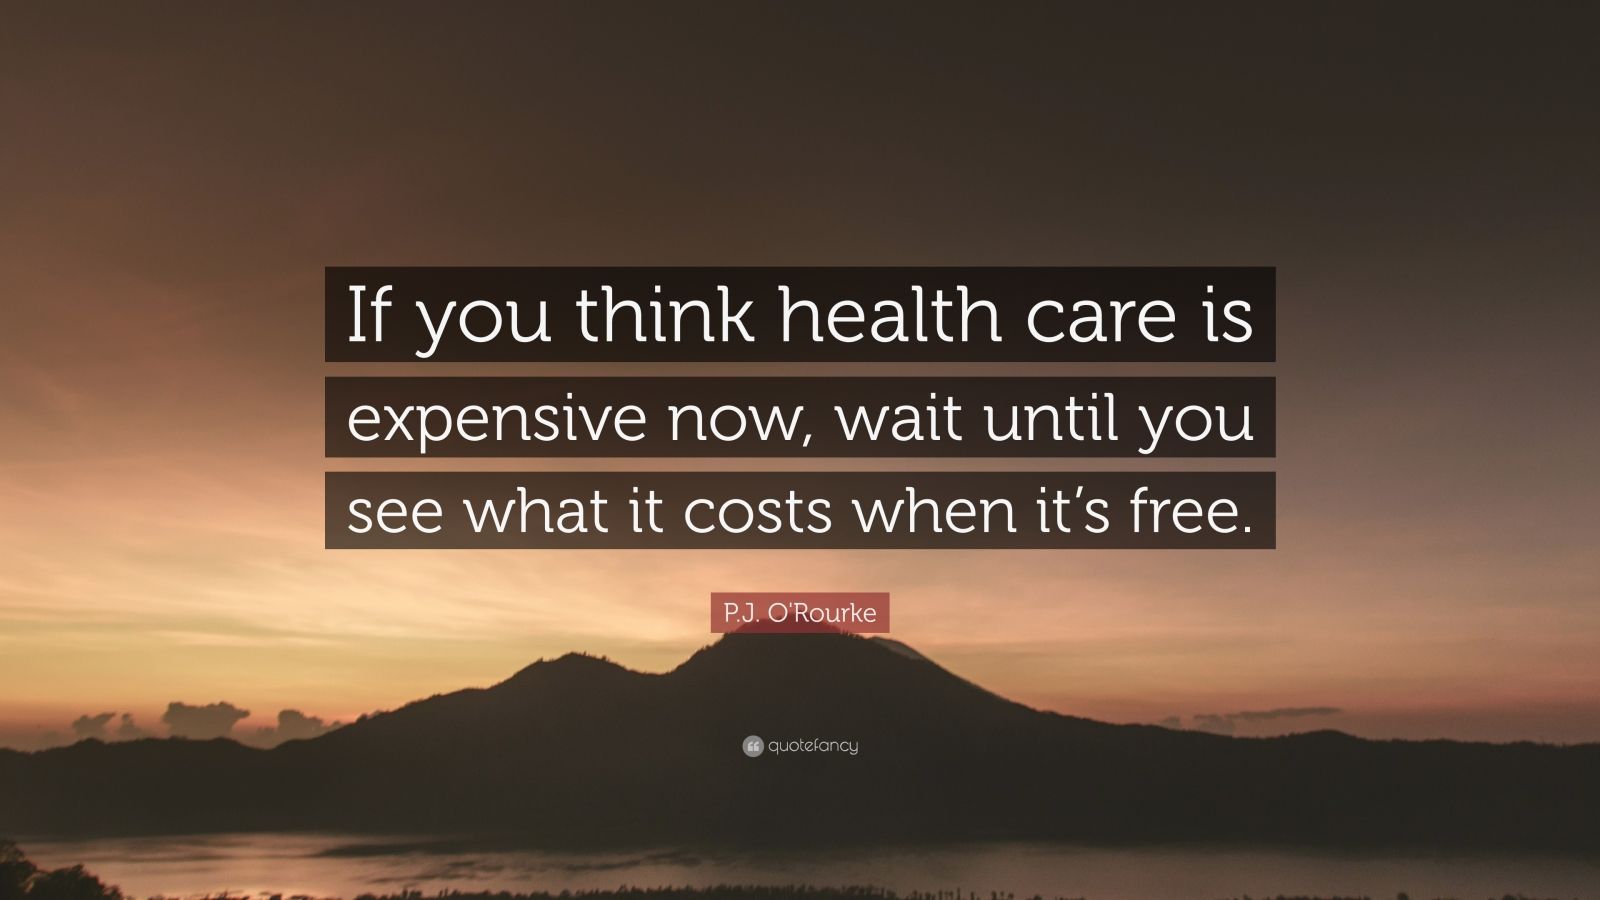 P J O Rourke Quote If You Think Health Care Is Expensive Now Wait Until You See What It Costs When It S Free